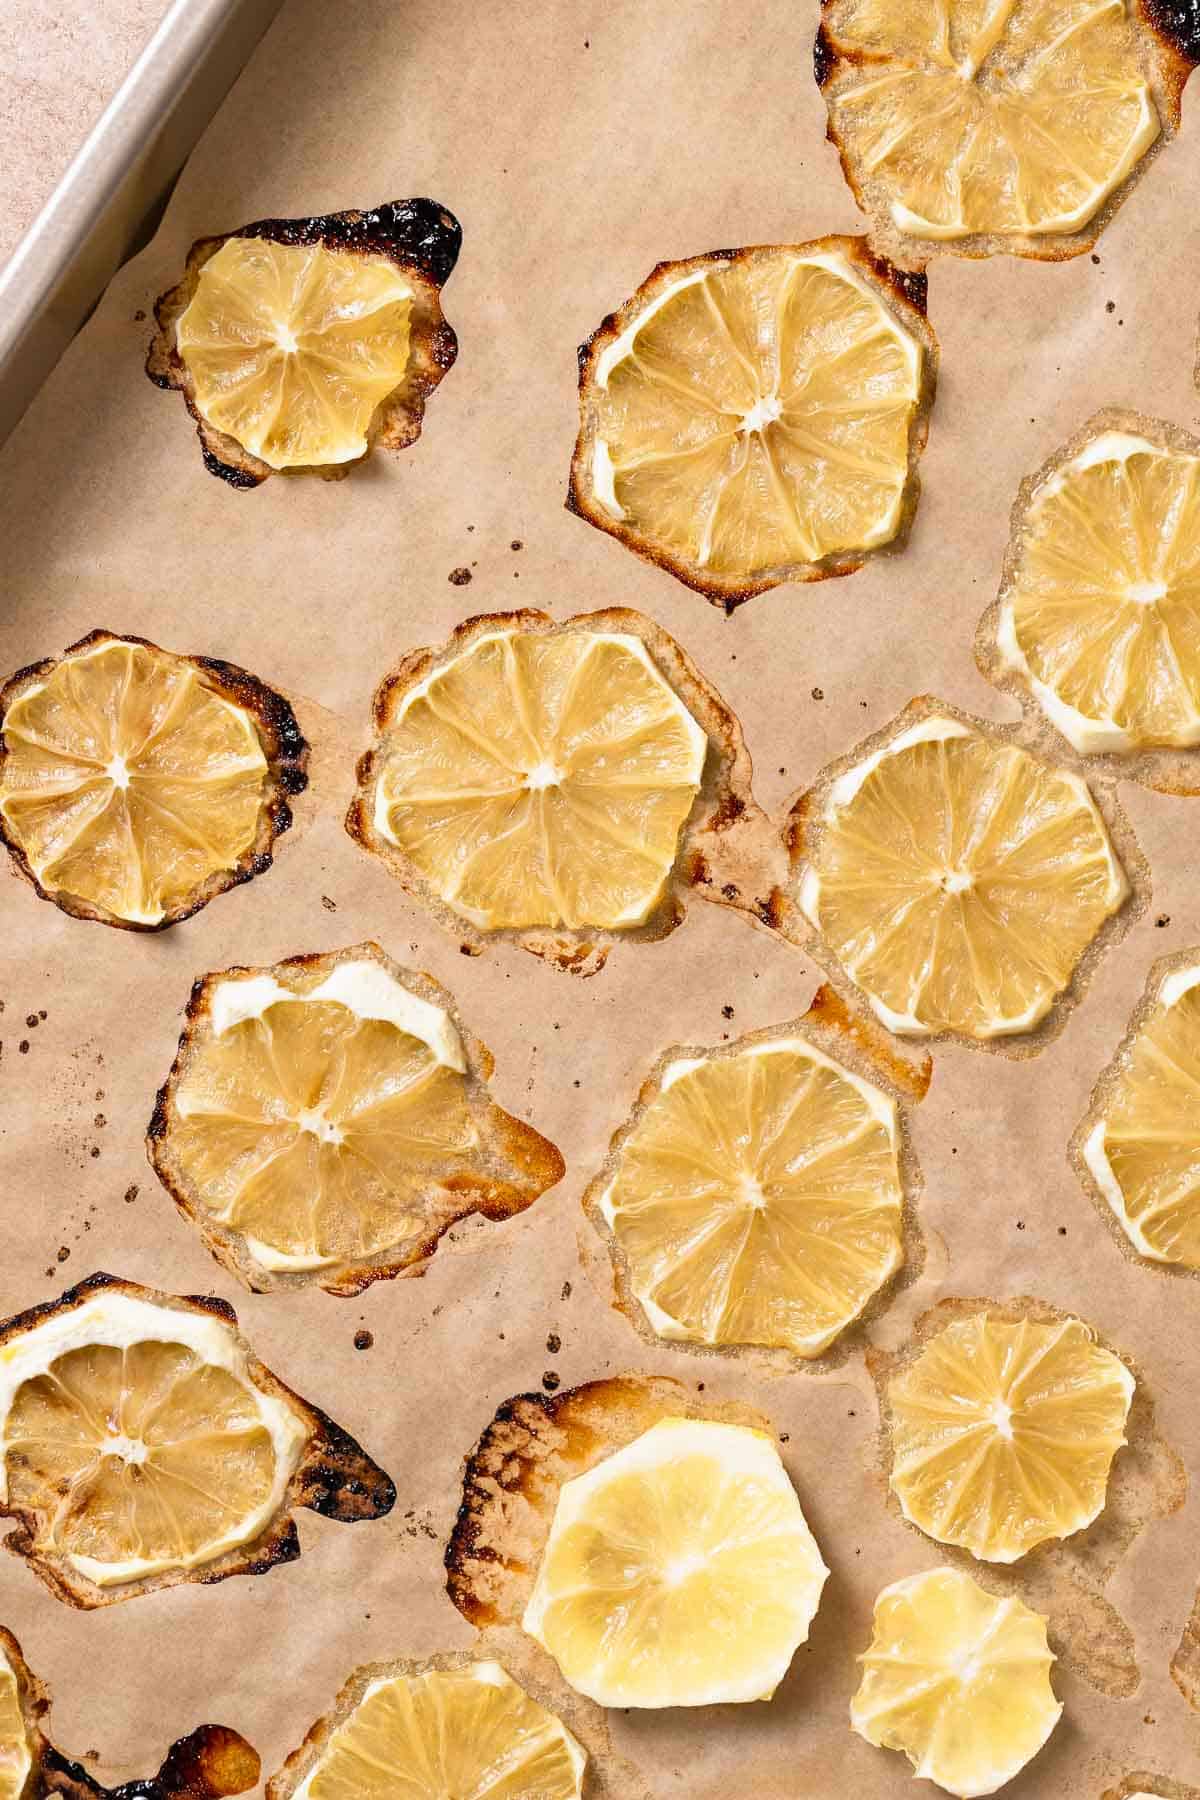 A sheet pan with roasted lemon slices on it.